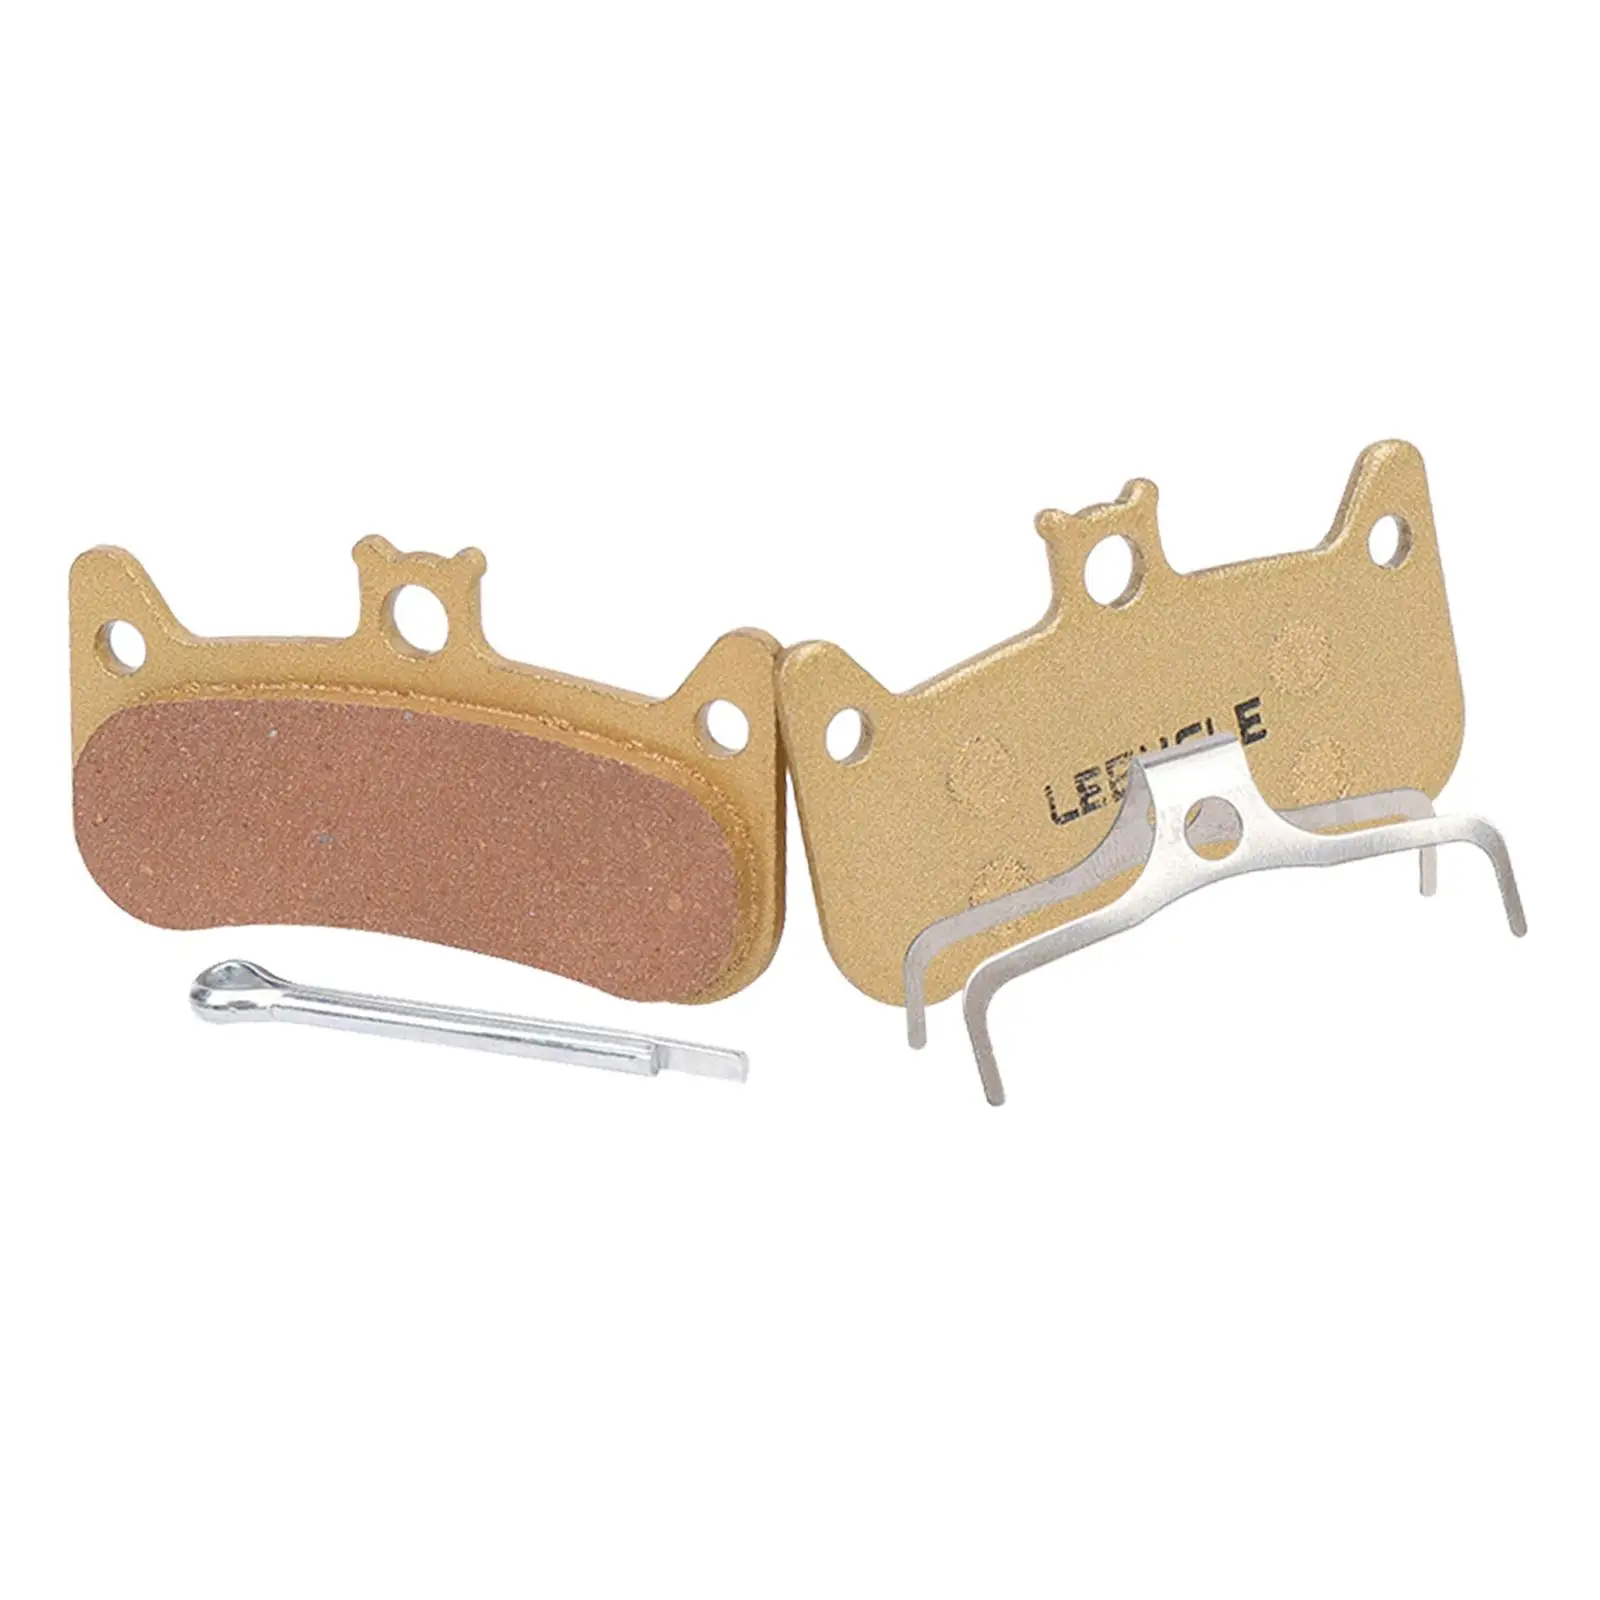 2 Pieces Bike Brake Pads Durable Spare Parts Heat Resistant High Strength Modification Accessories Easily Install Brake Pad